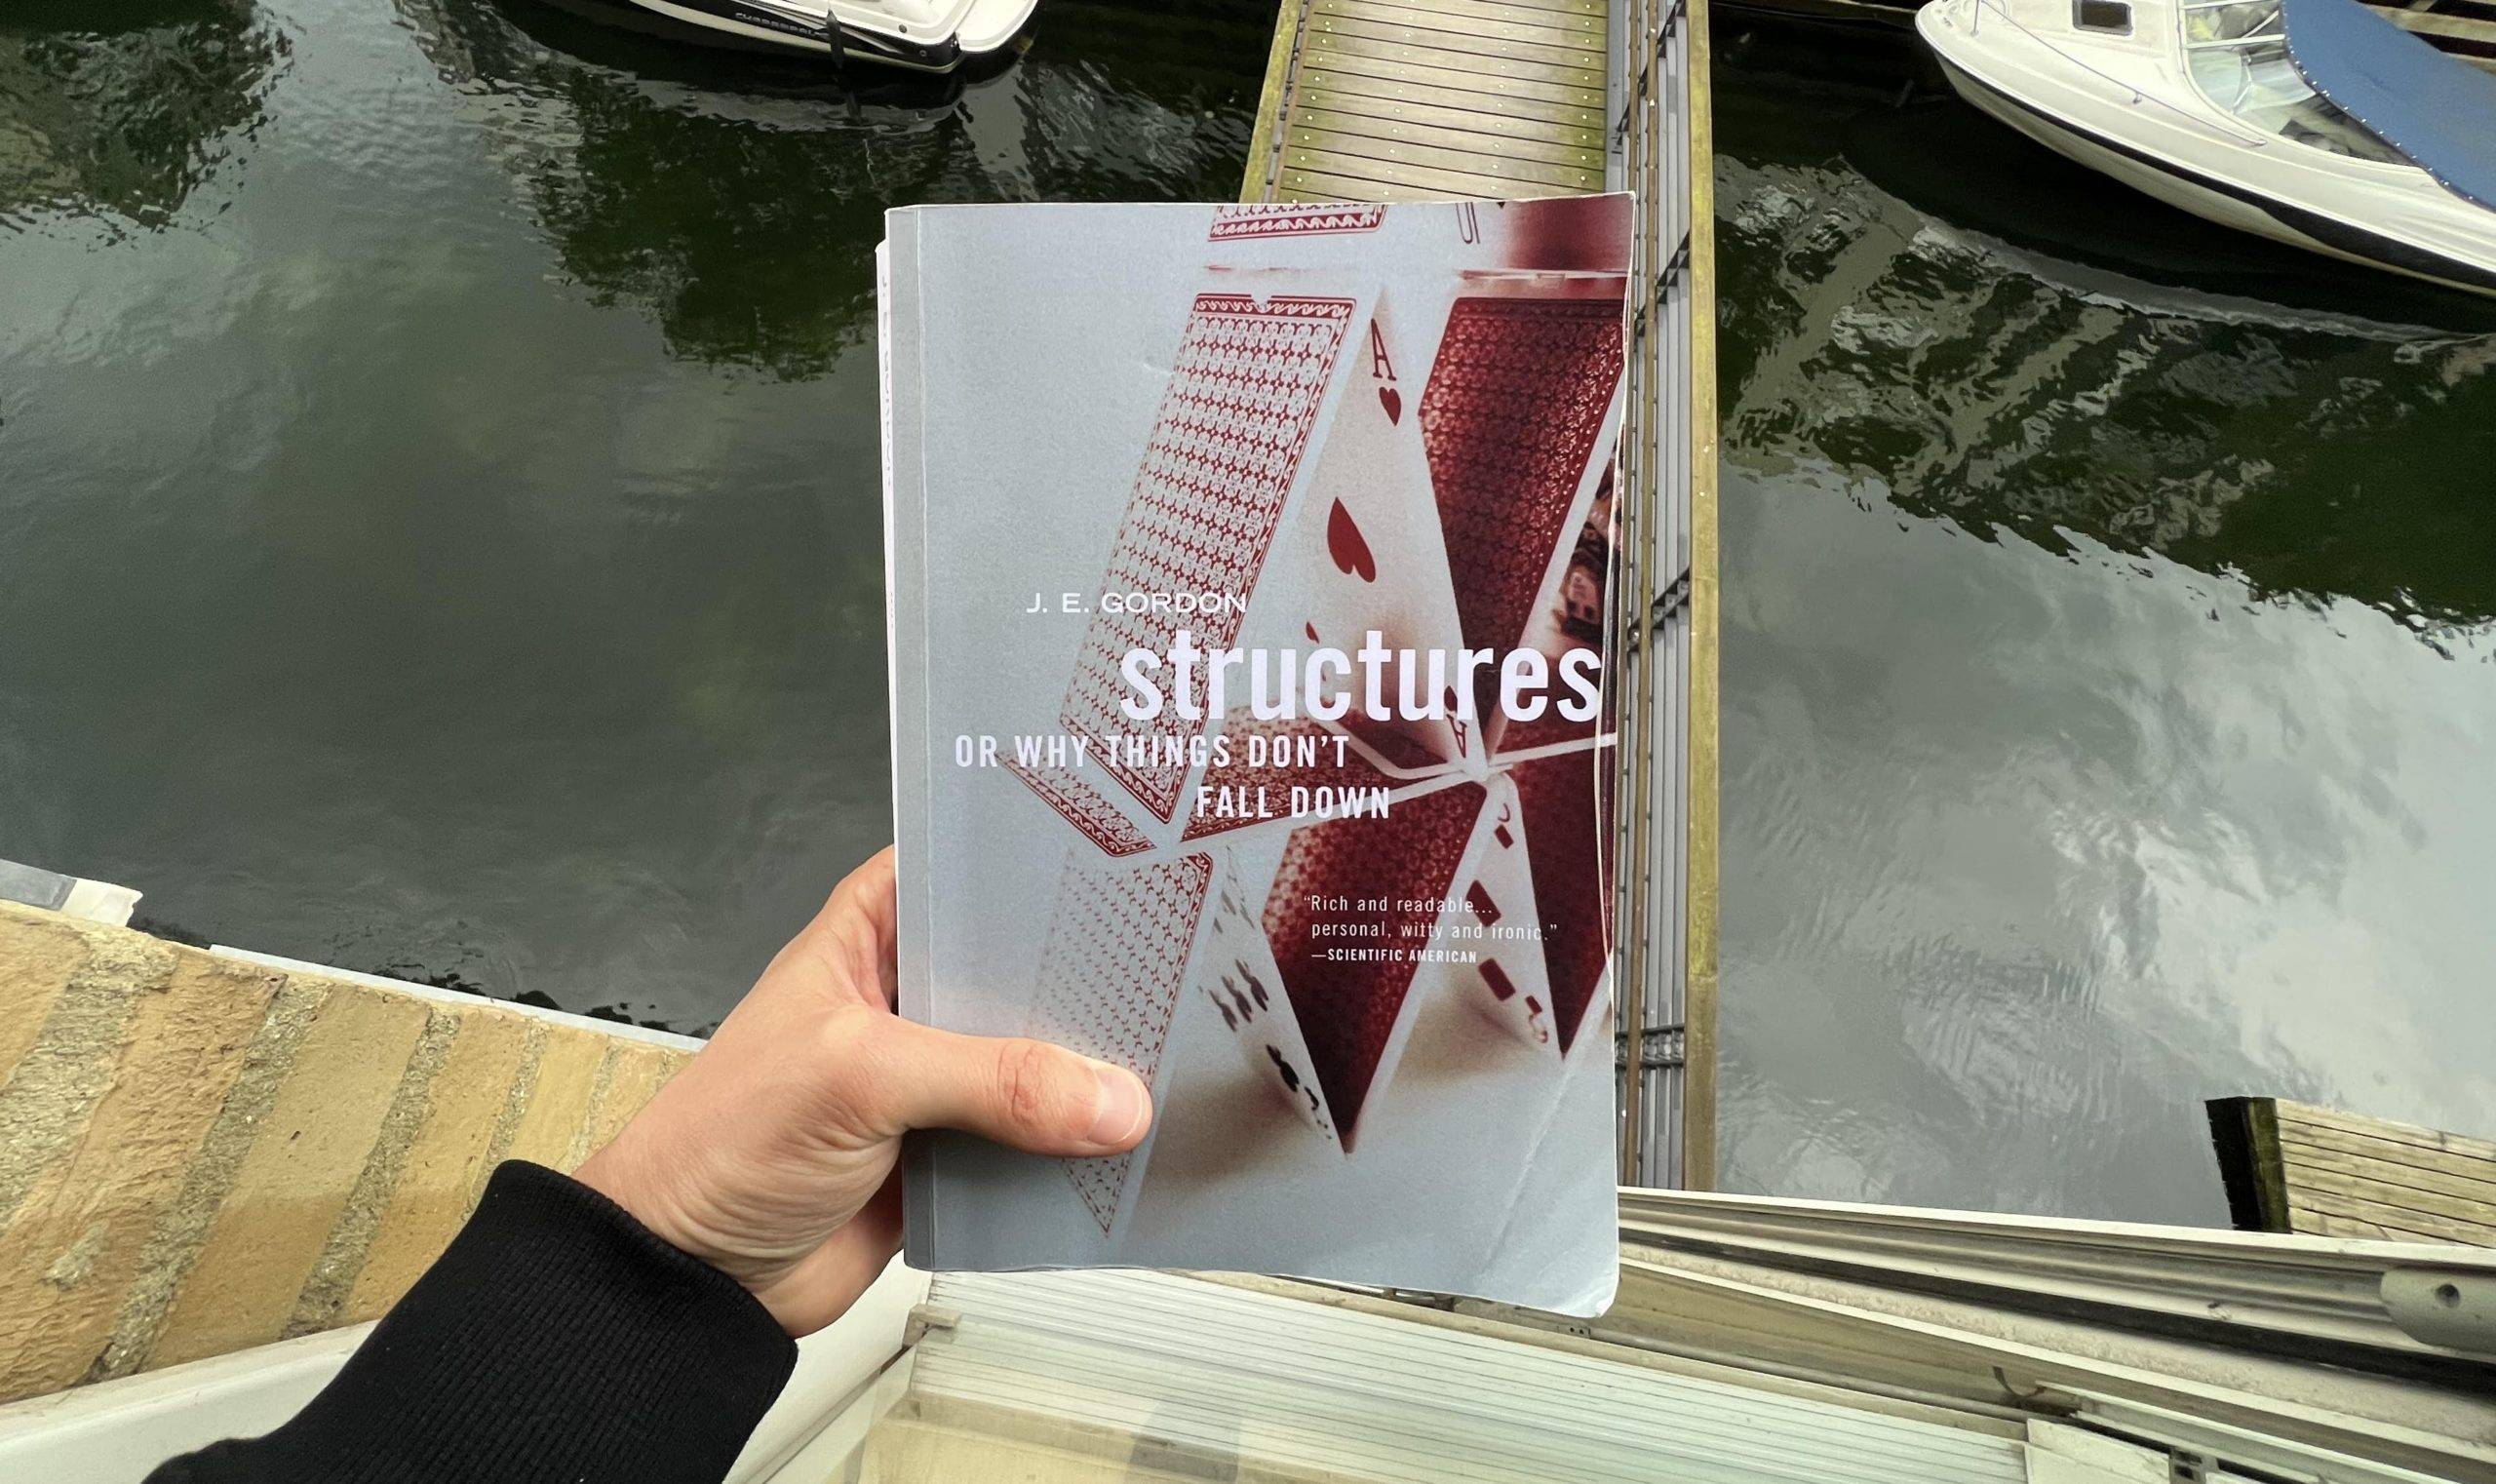 structures-or why things don't fall down review and notes